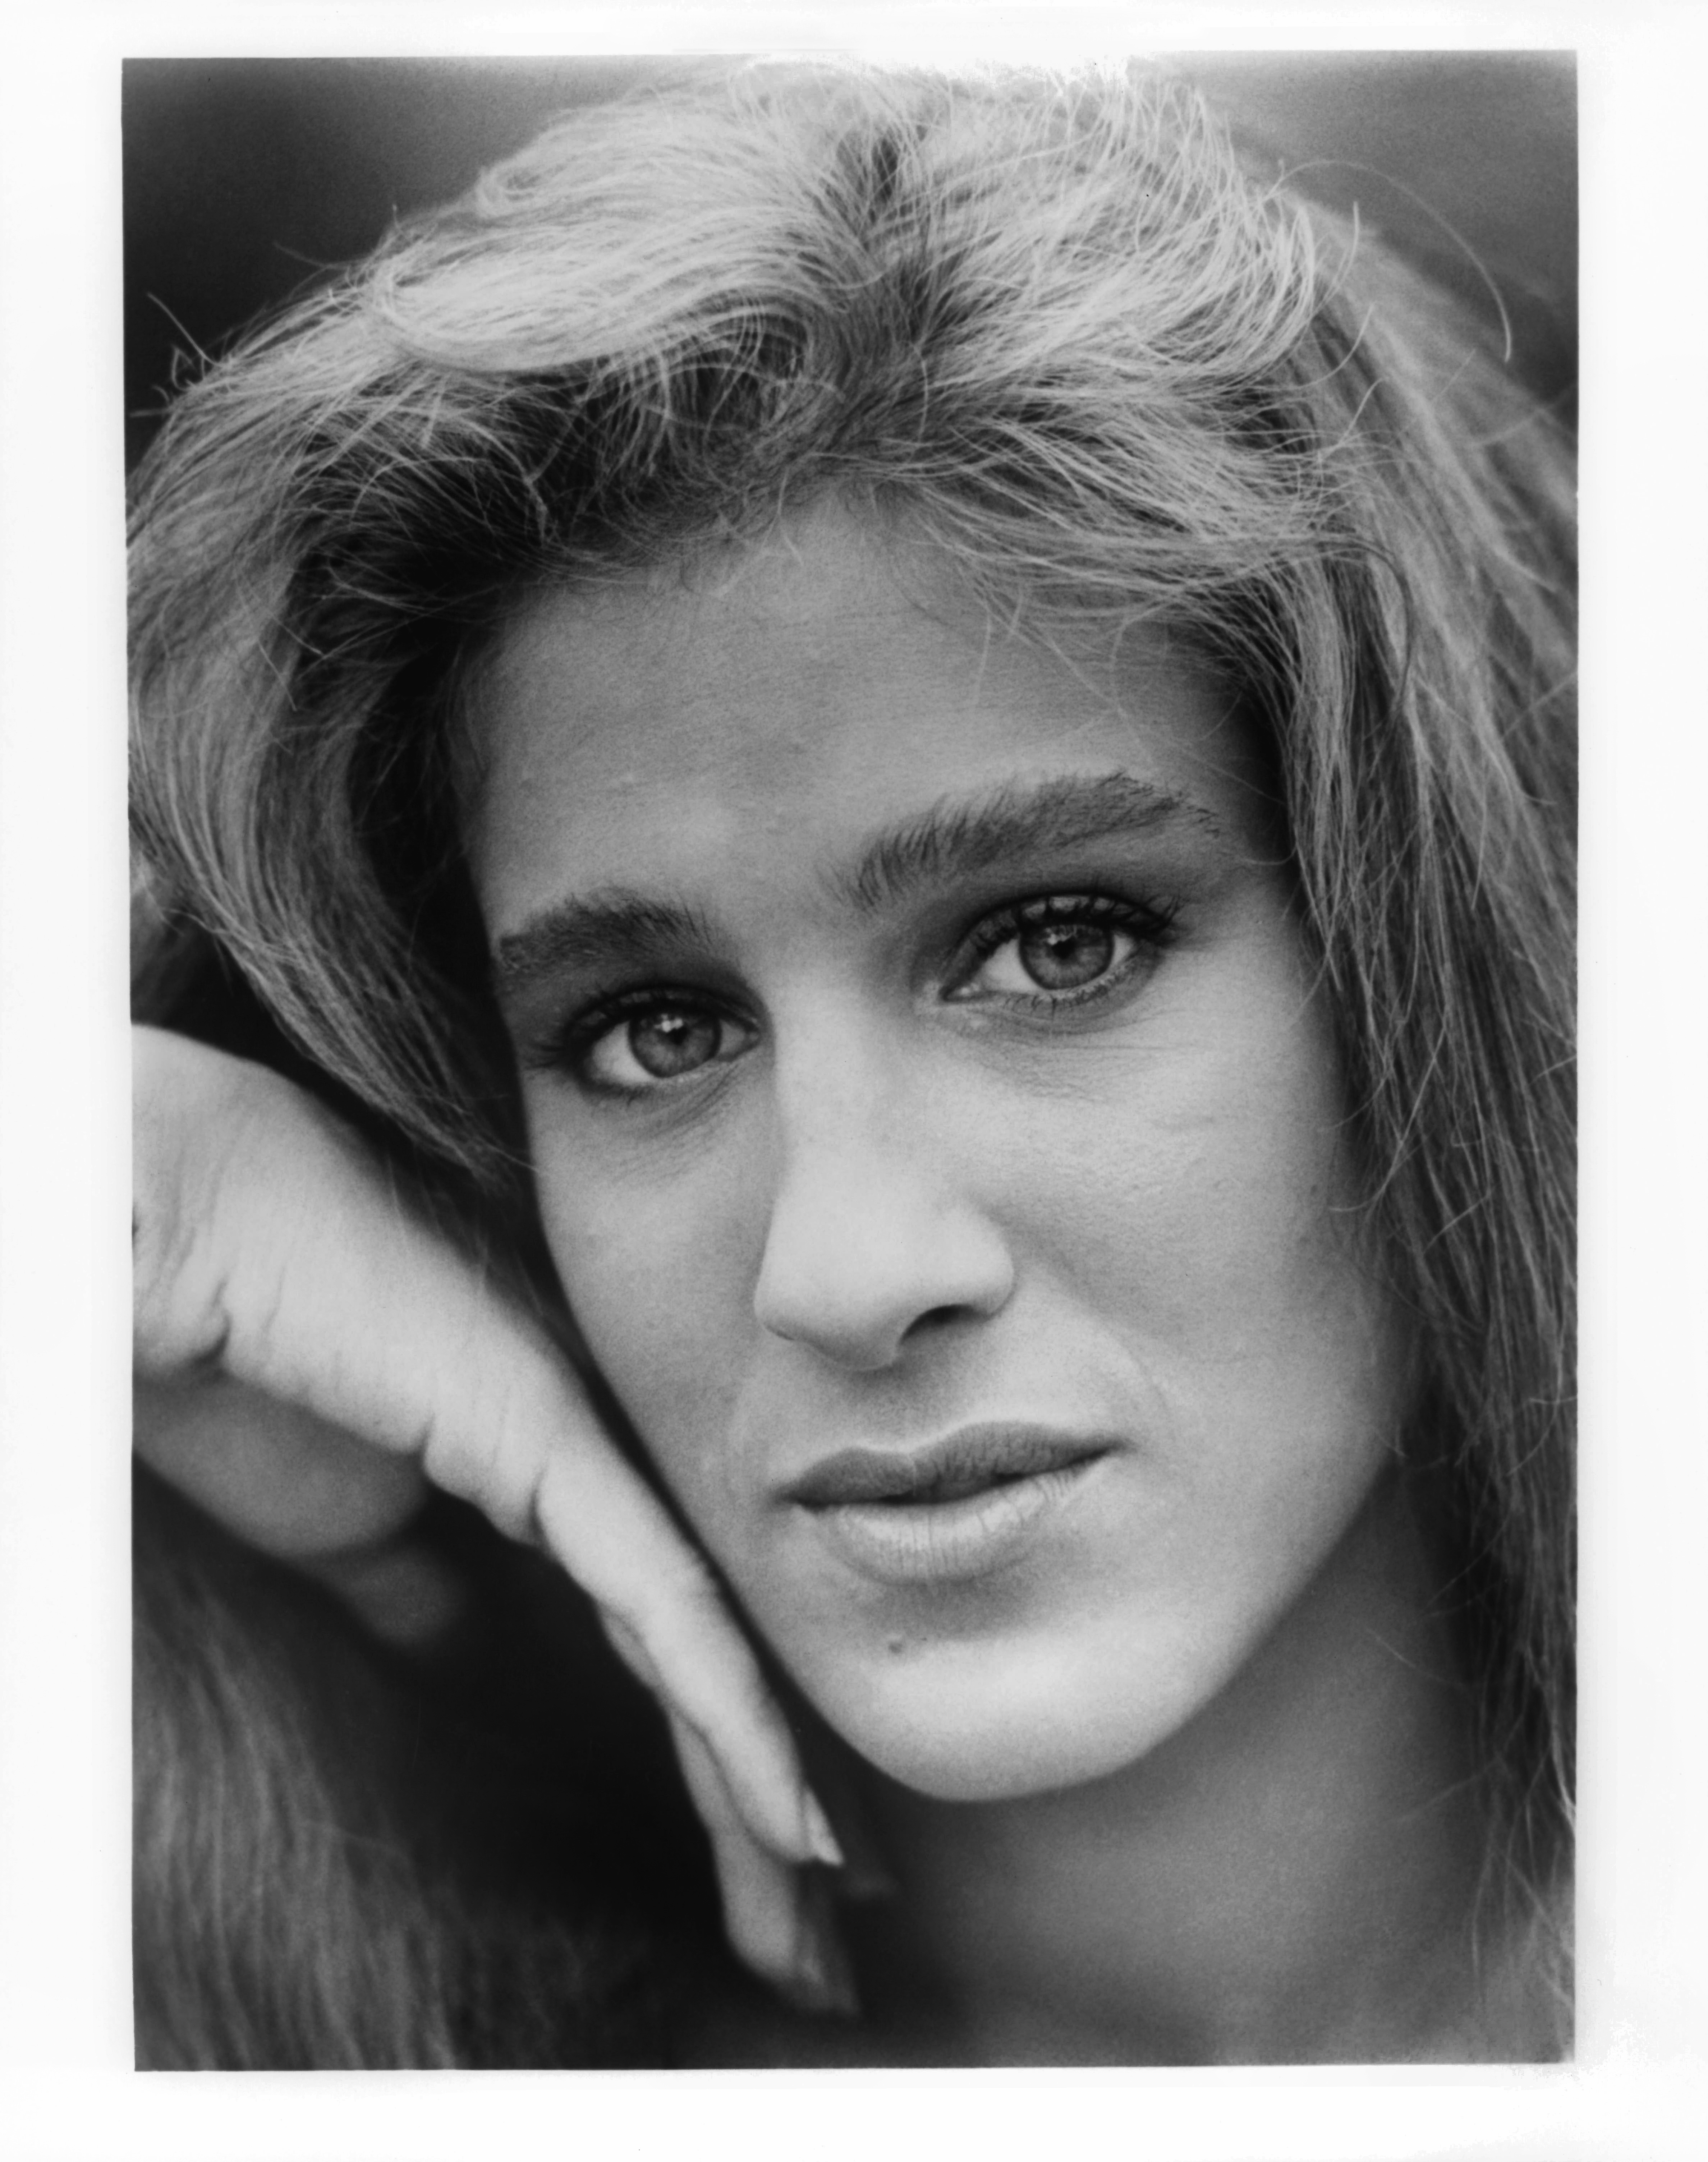 Sarah Jessica Parker's publicity portrait for the film "Girls Just Want To Have Fun" in 1985 | Source: Getty Images